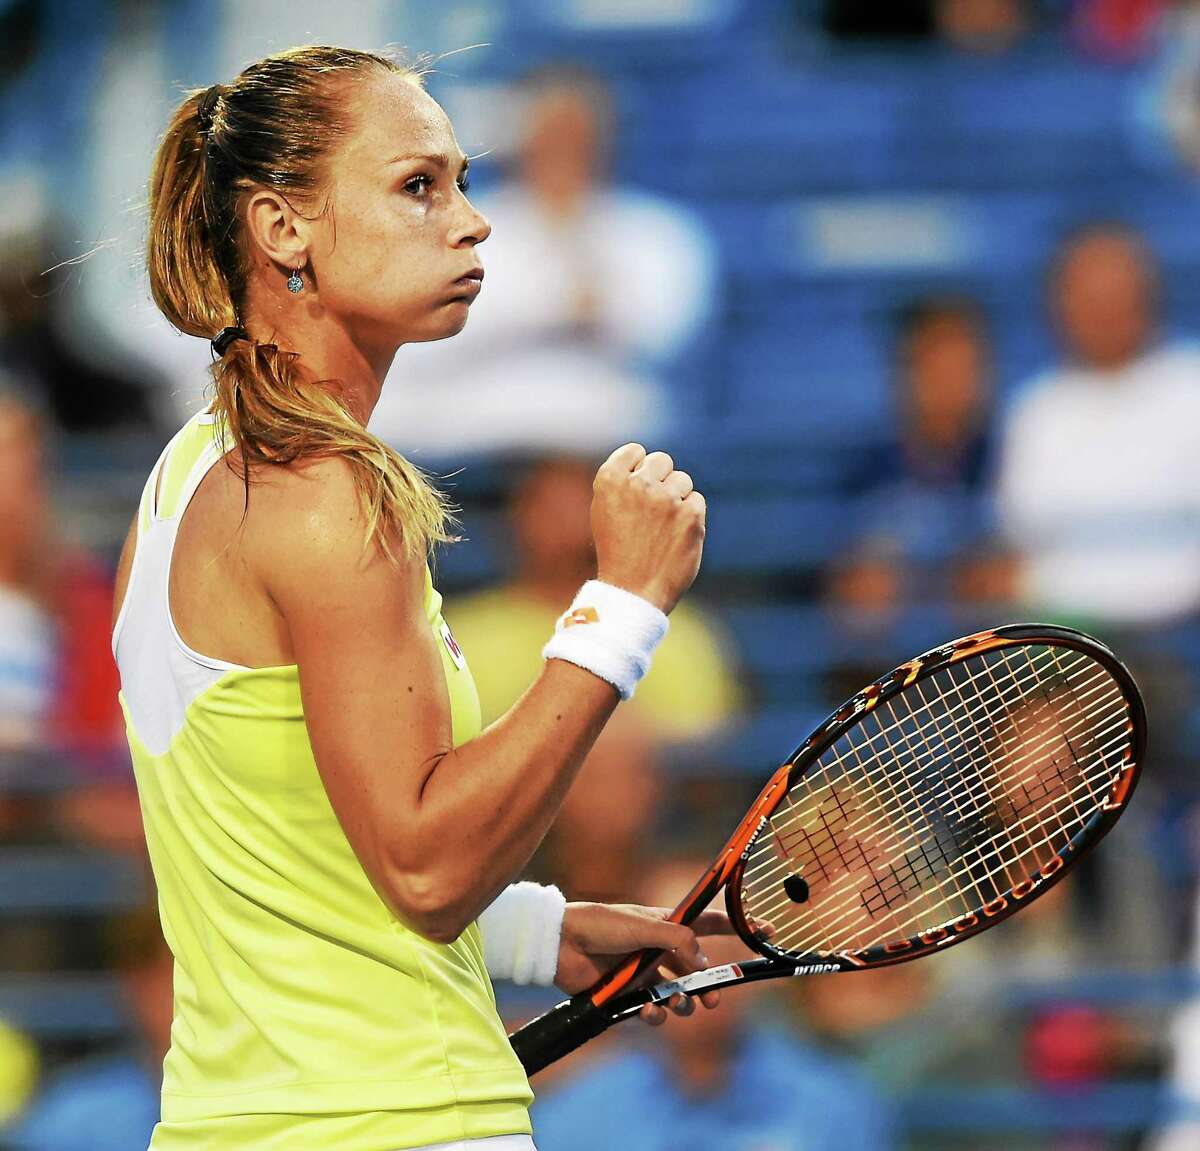 Magdalena Rybarikova defeated the Connecticut Open’s top seed and defending champion Simona Halep on Tuesday night at the Connecticut Tennis Center.